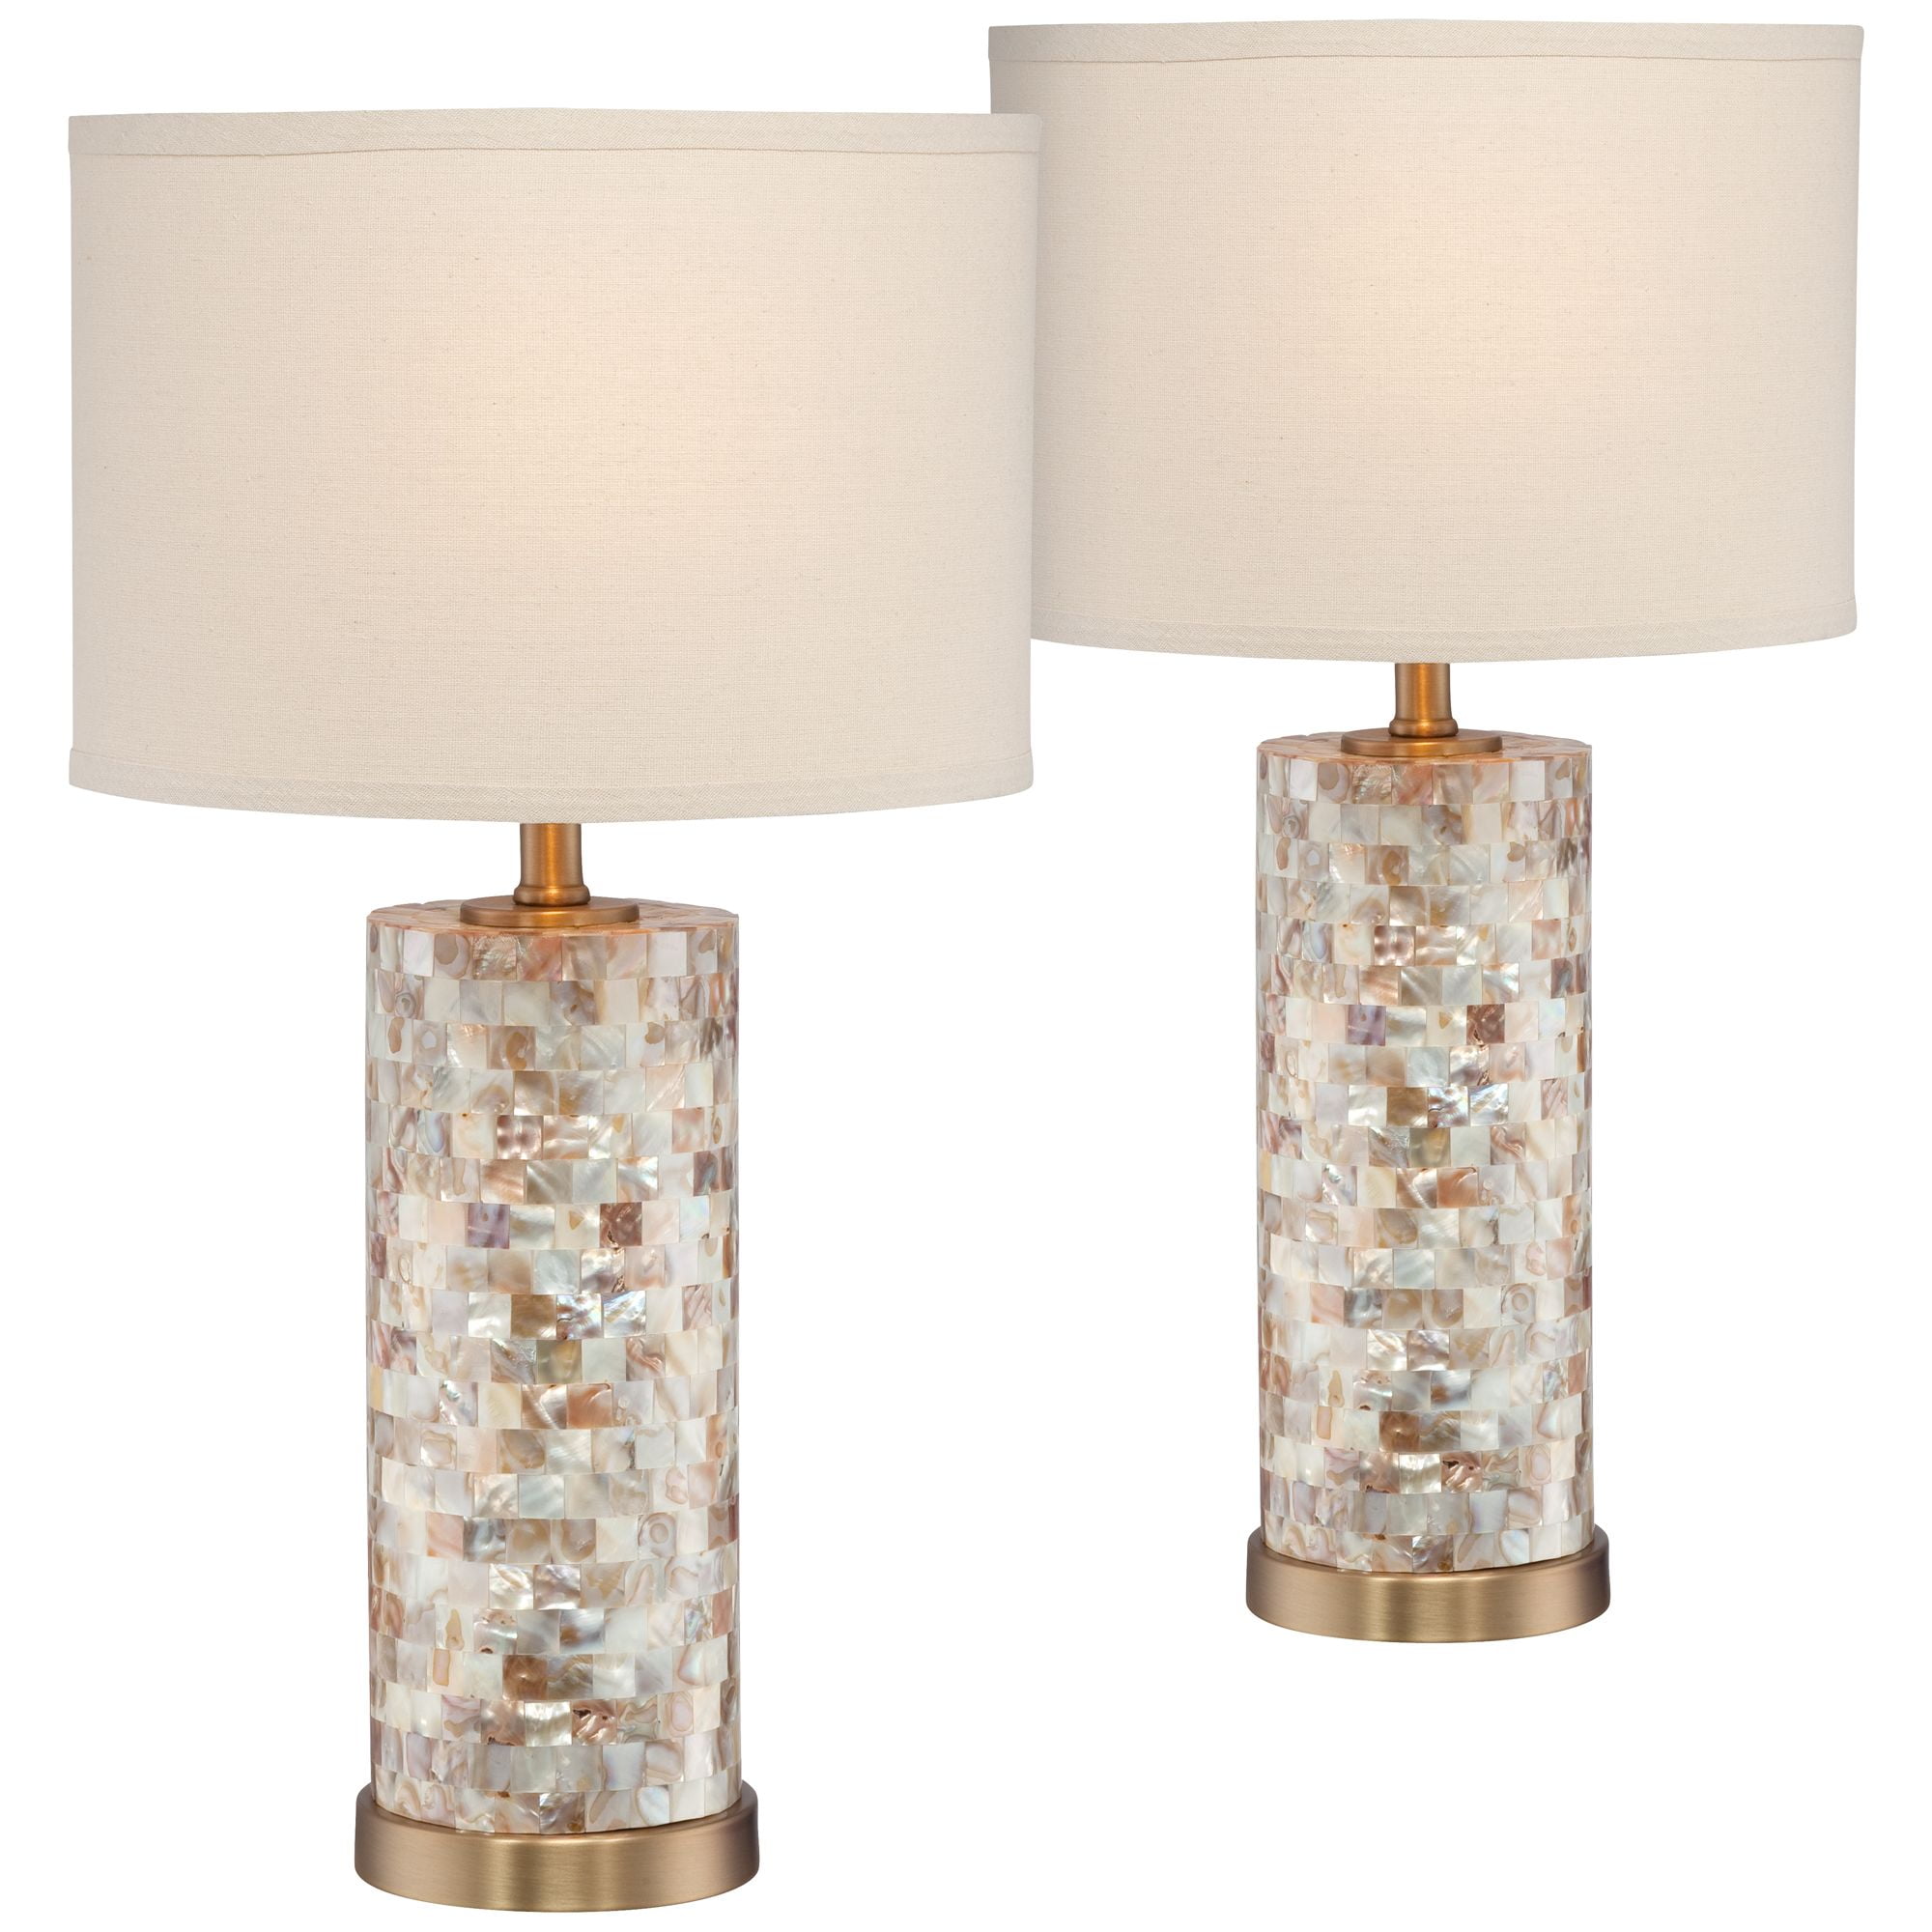 360 Lighting Coastal Accent Table Lamps Set of 2 Mother of